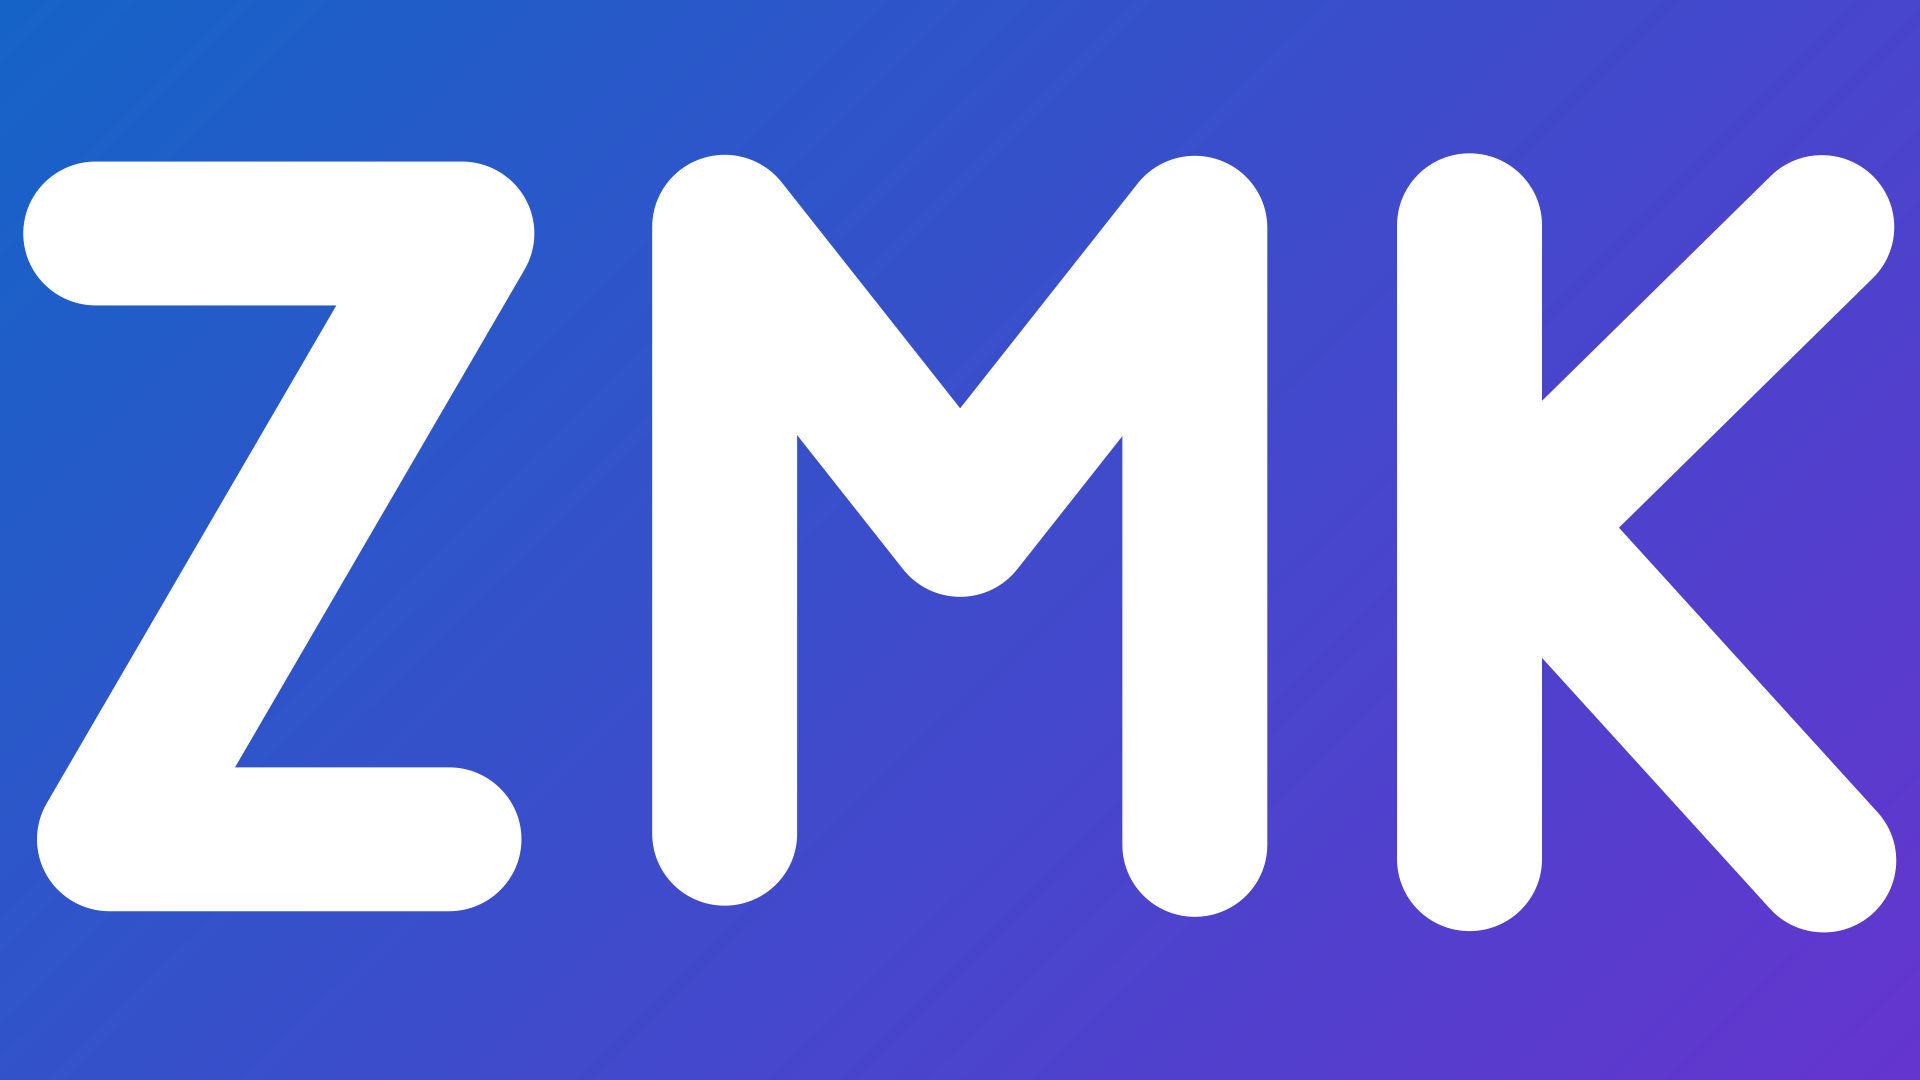 ZMK Overview